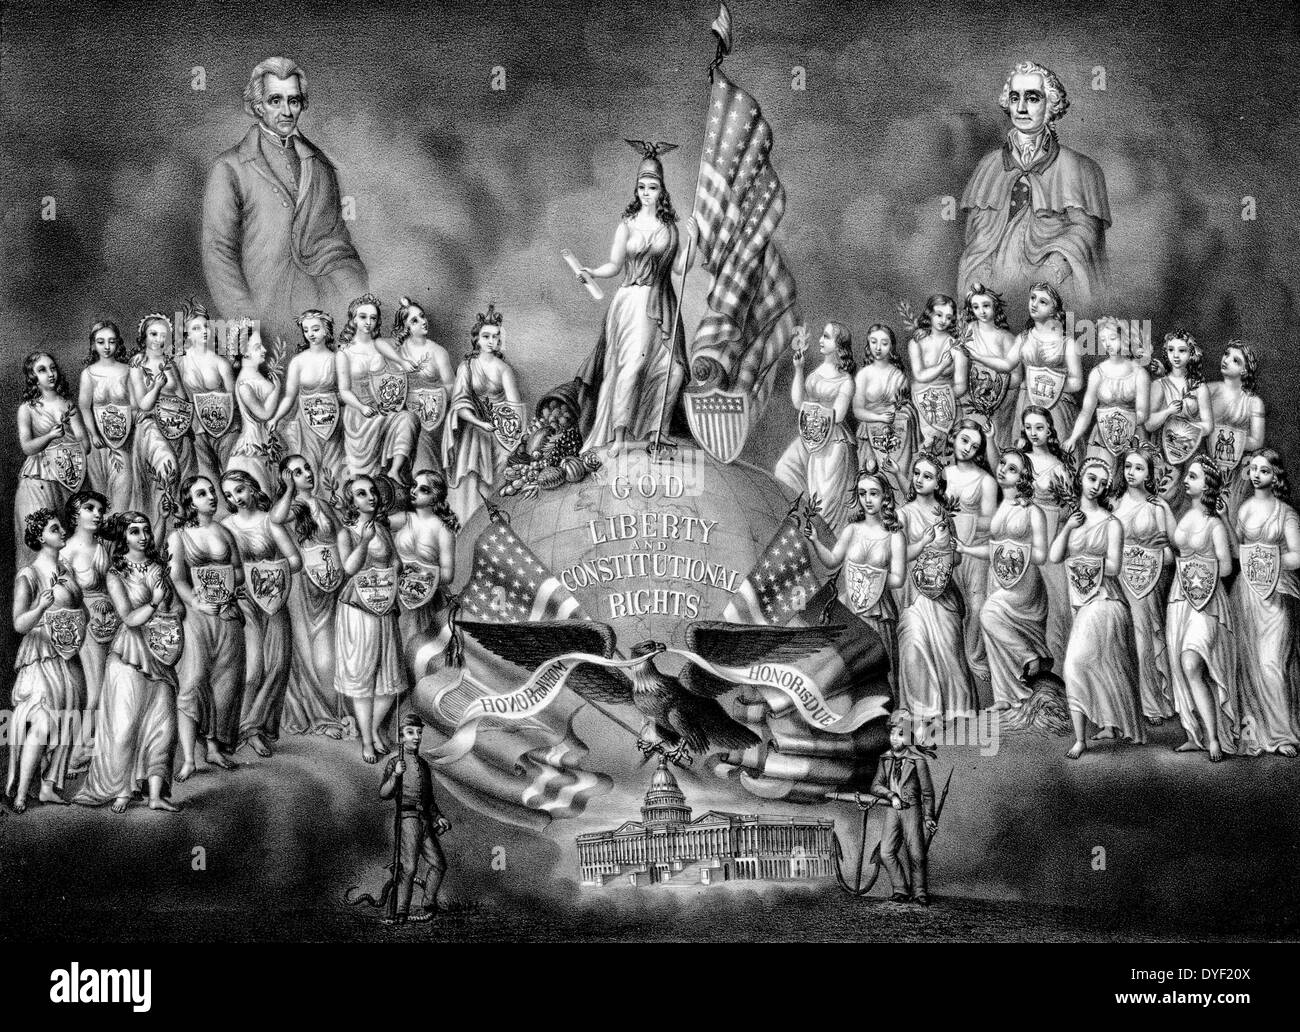 The Reunion of the Home of the Brave and the Free an illustration showing portraits of President George Washington and President Andrew Jackson looking over the ideals of liberty personified as women. Lady Liberty stands atop the globe holding a scroll and a flowing US flag. Next to her lies a cornucopia spilling out fruits of all types. Circa 1800's. Stock Photo